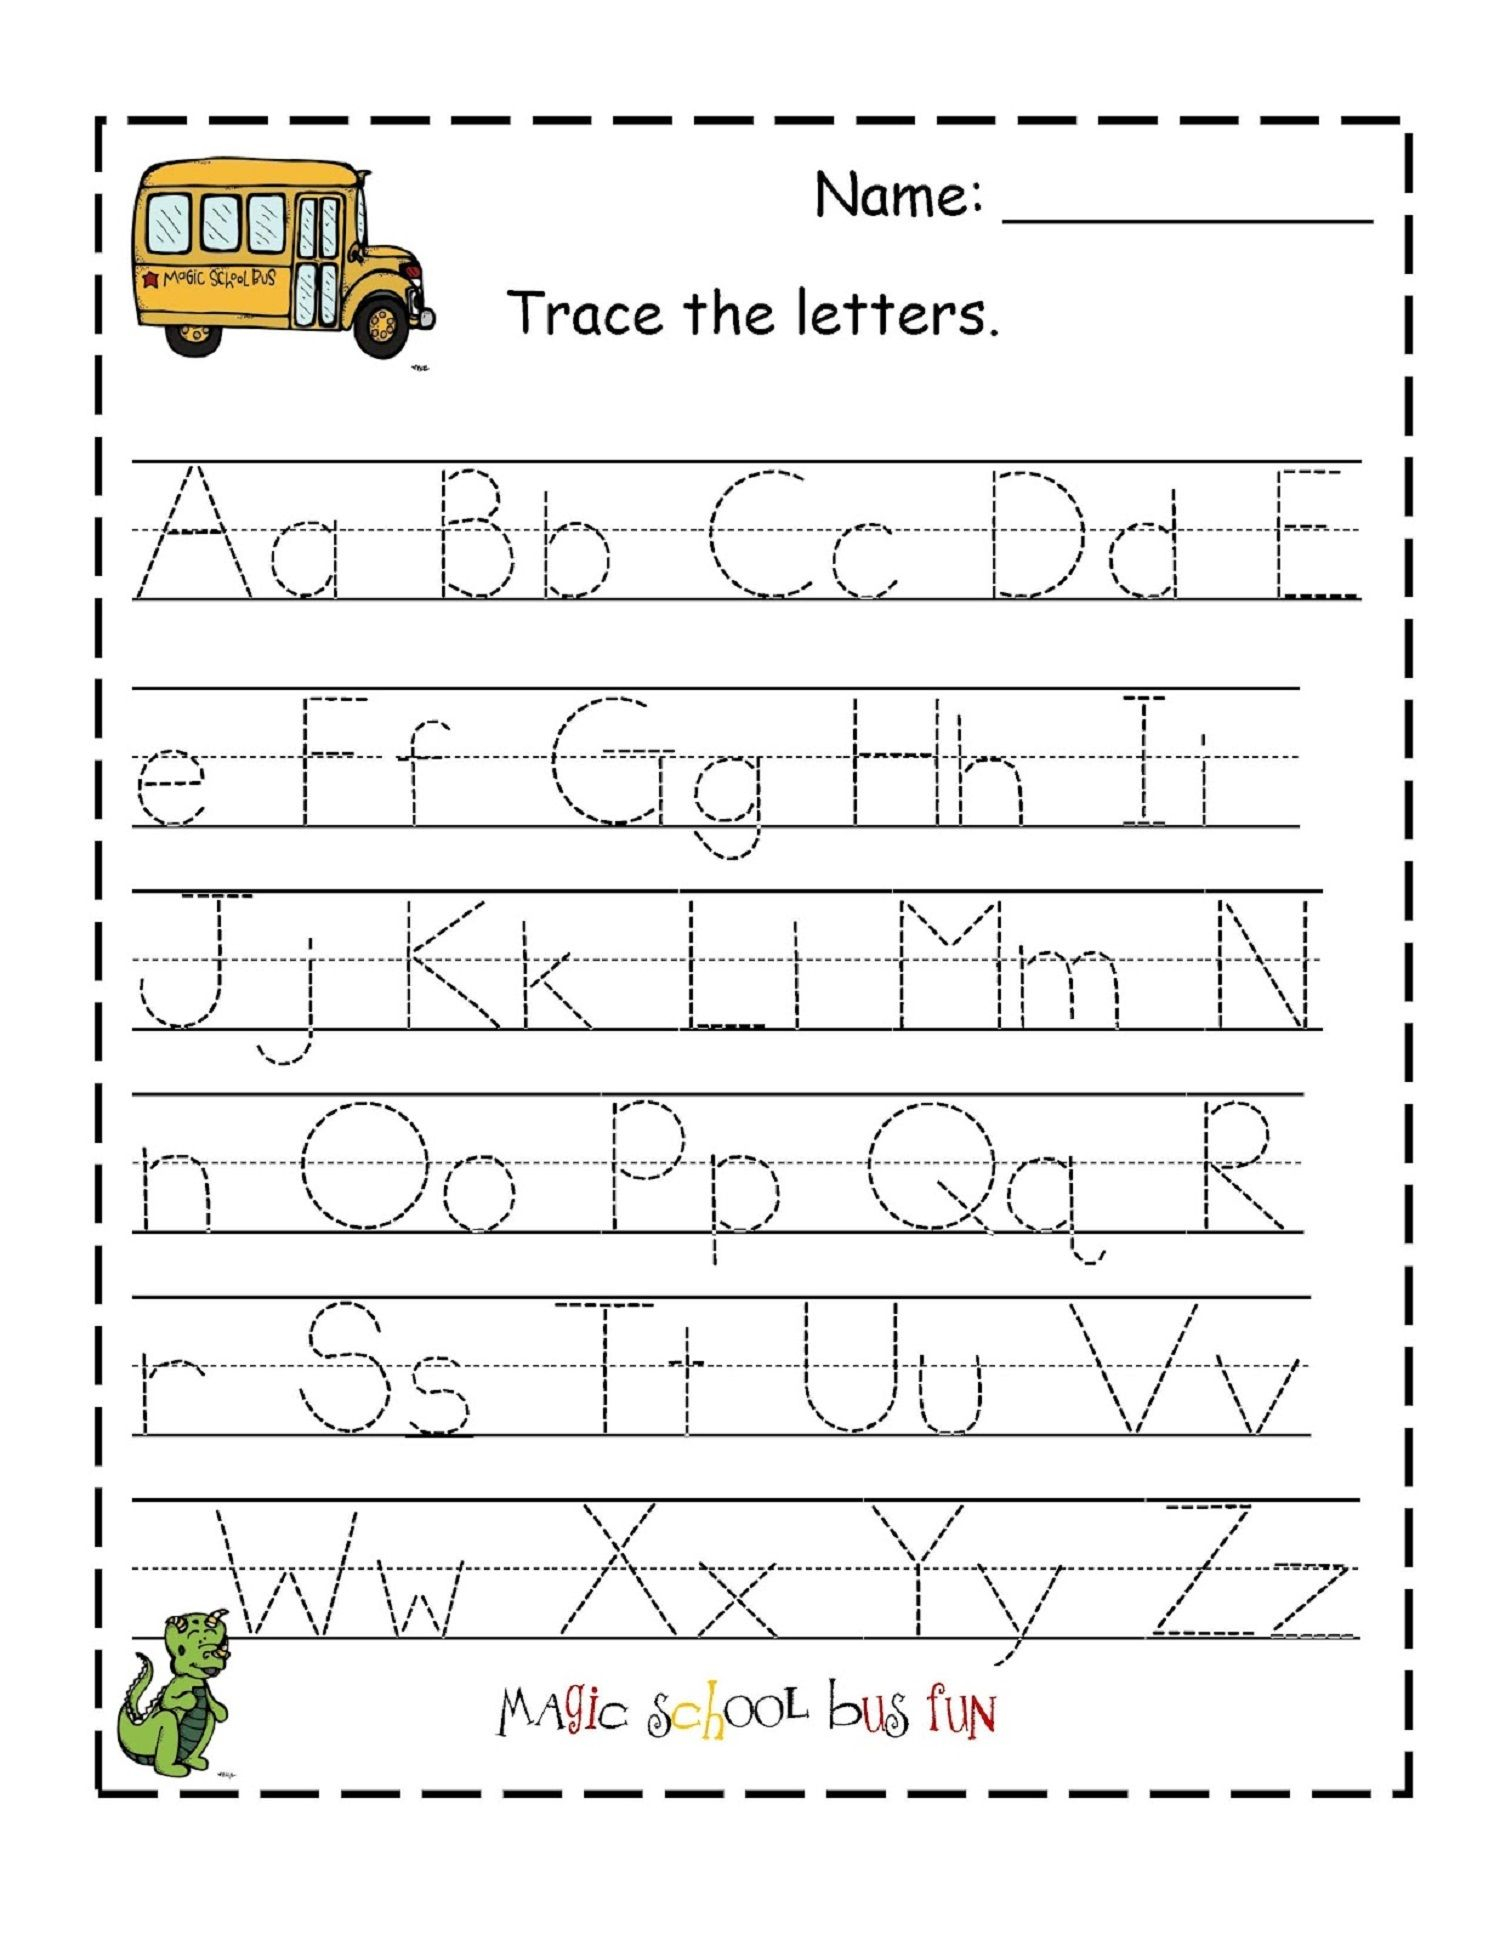 Traceable Alphabet For Learning Exercise In 2021 | Alphabet